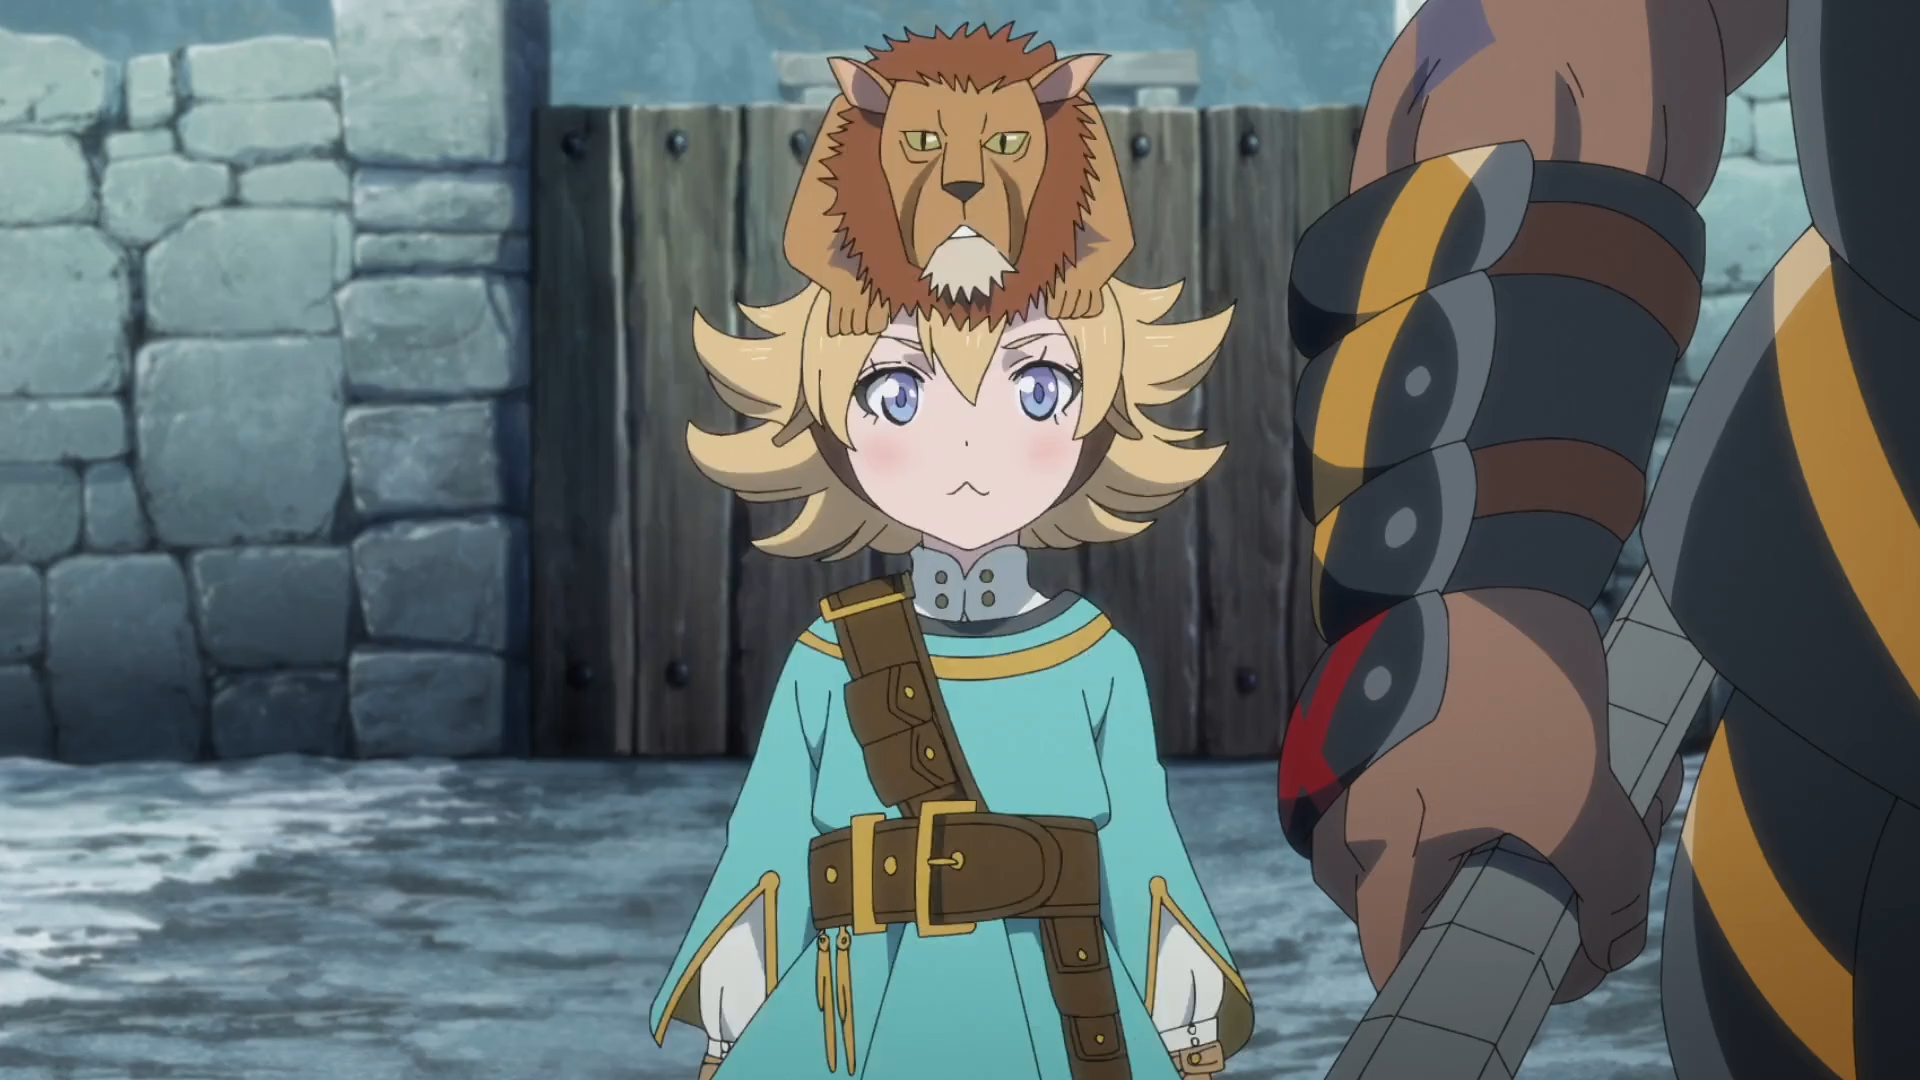 Ars no Kyojuu • Giant Beasts of Ars - Episode 12 discussion